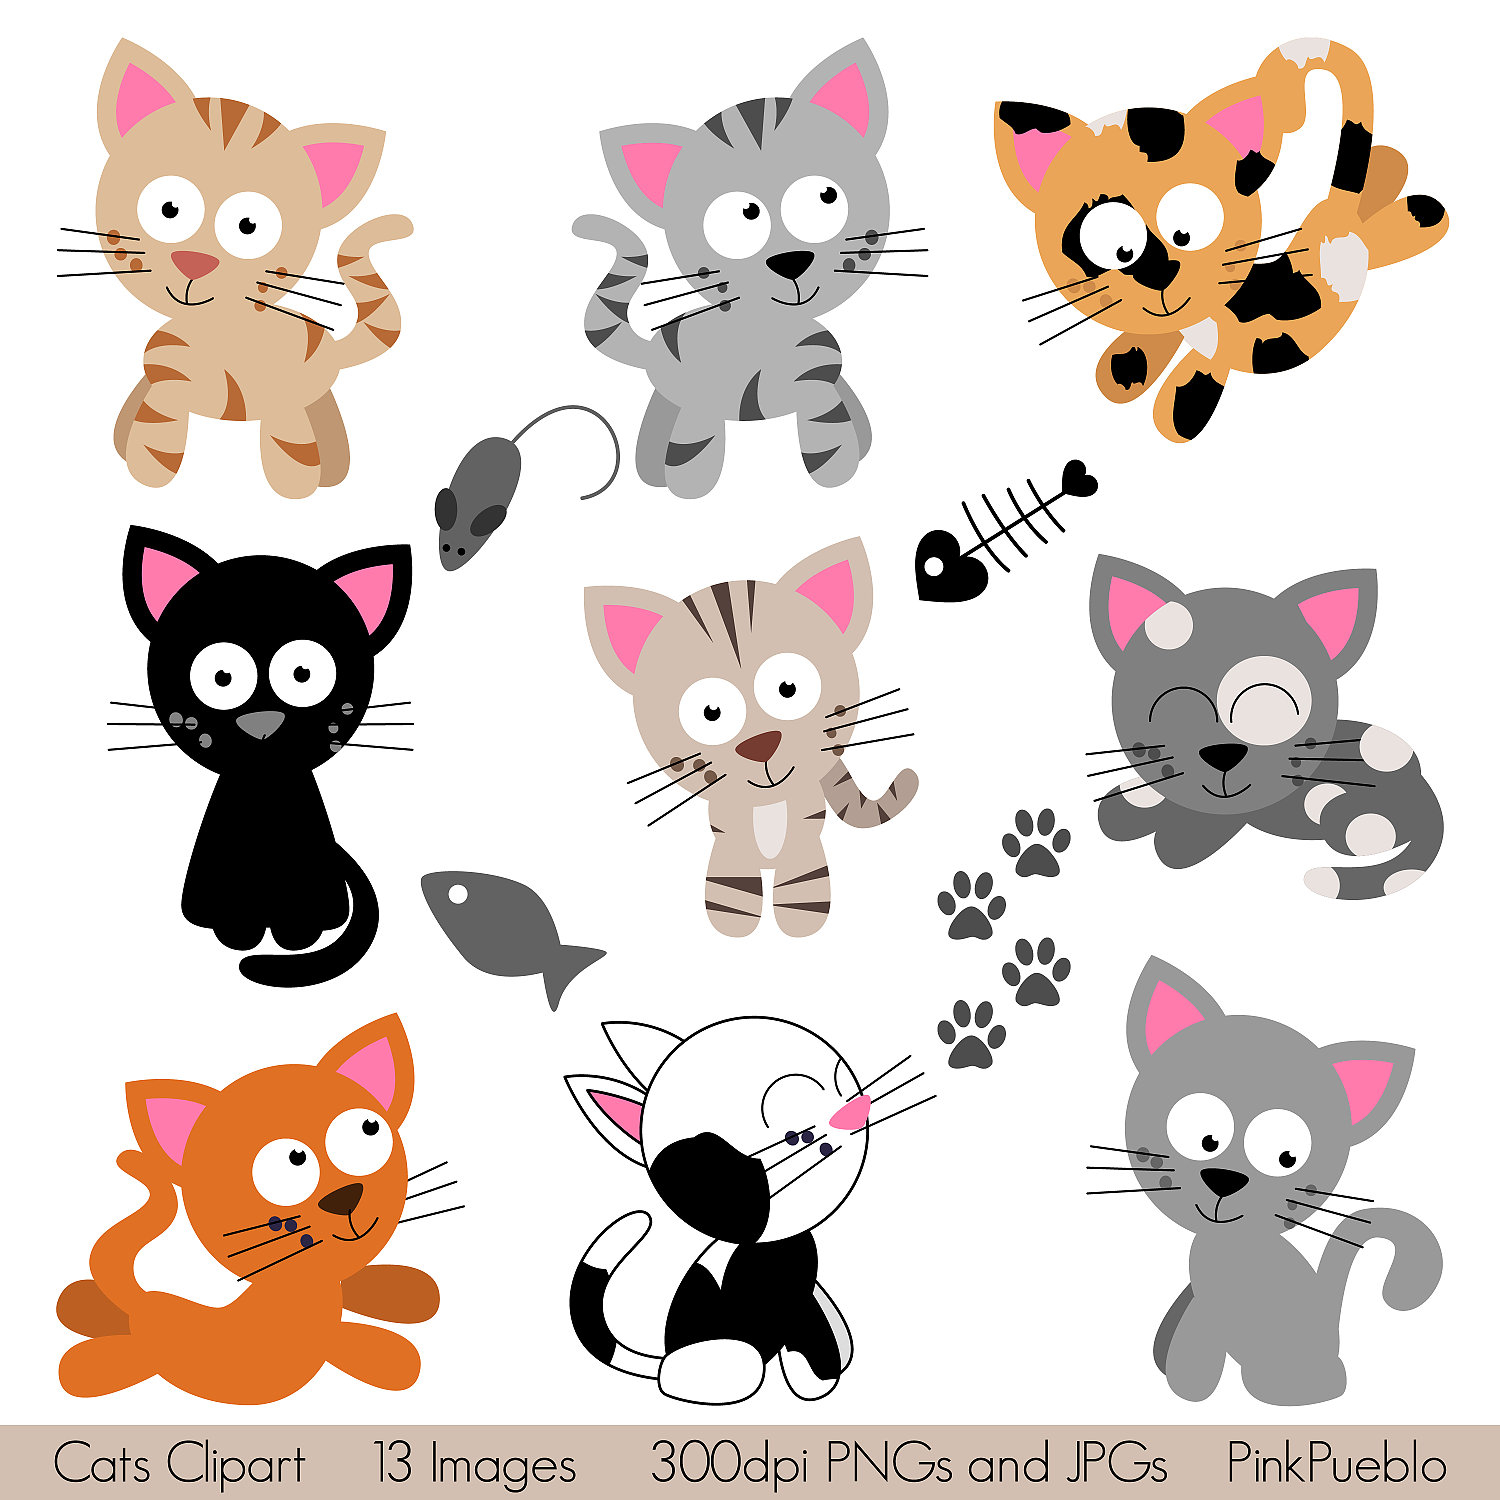 Cats clipart printable. Cat for free images